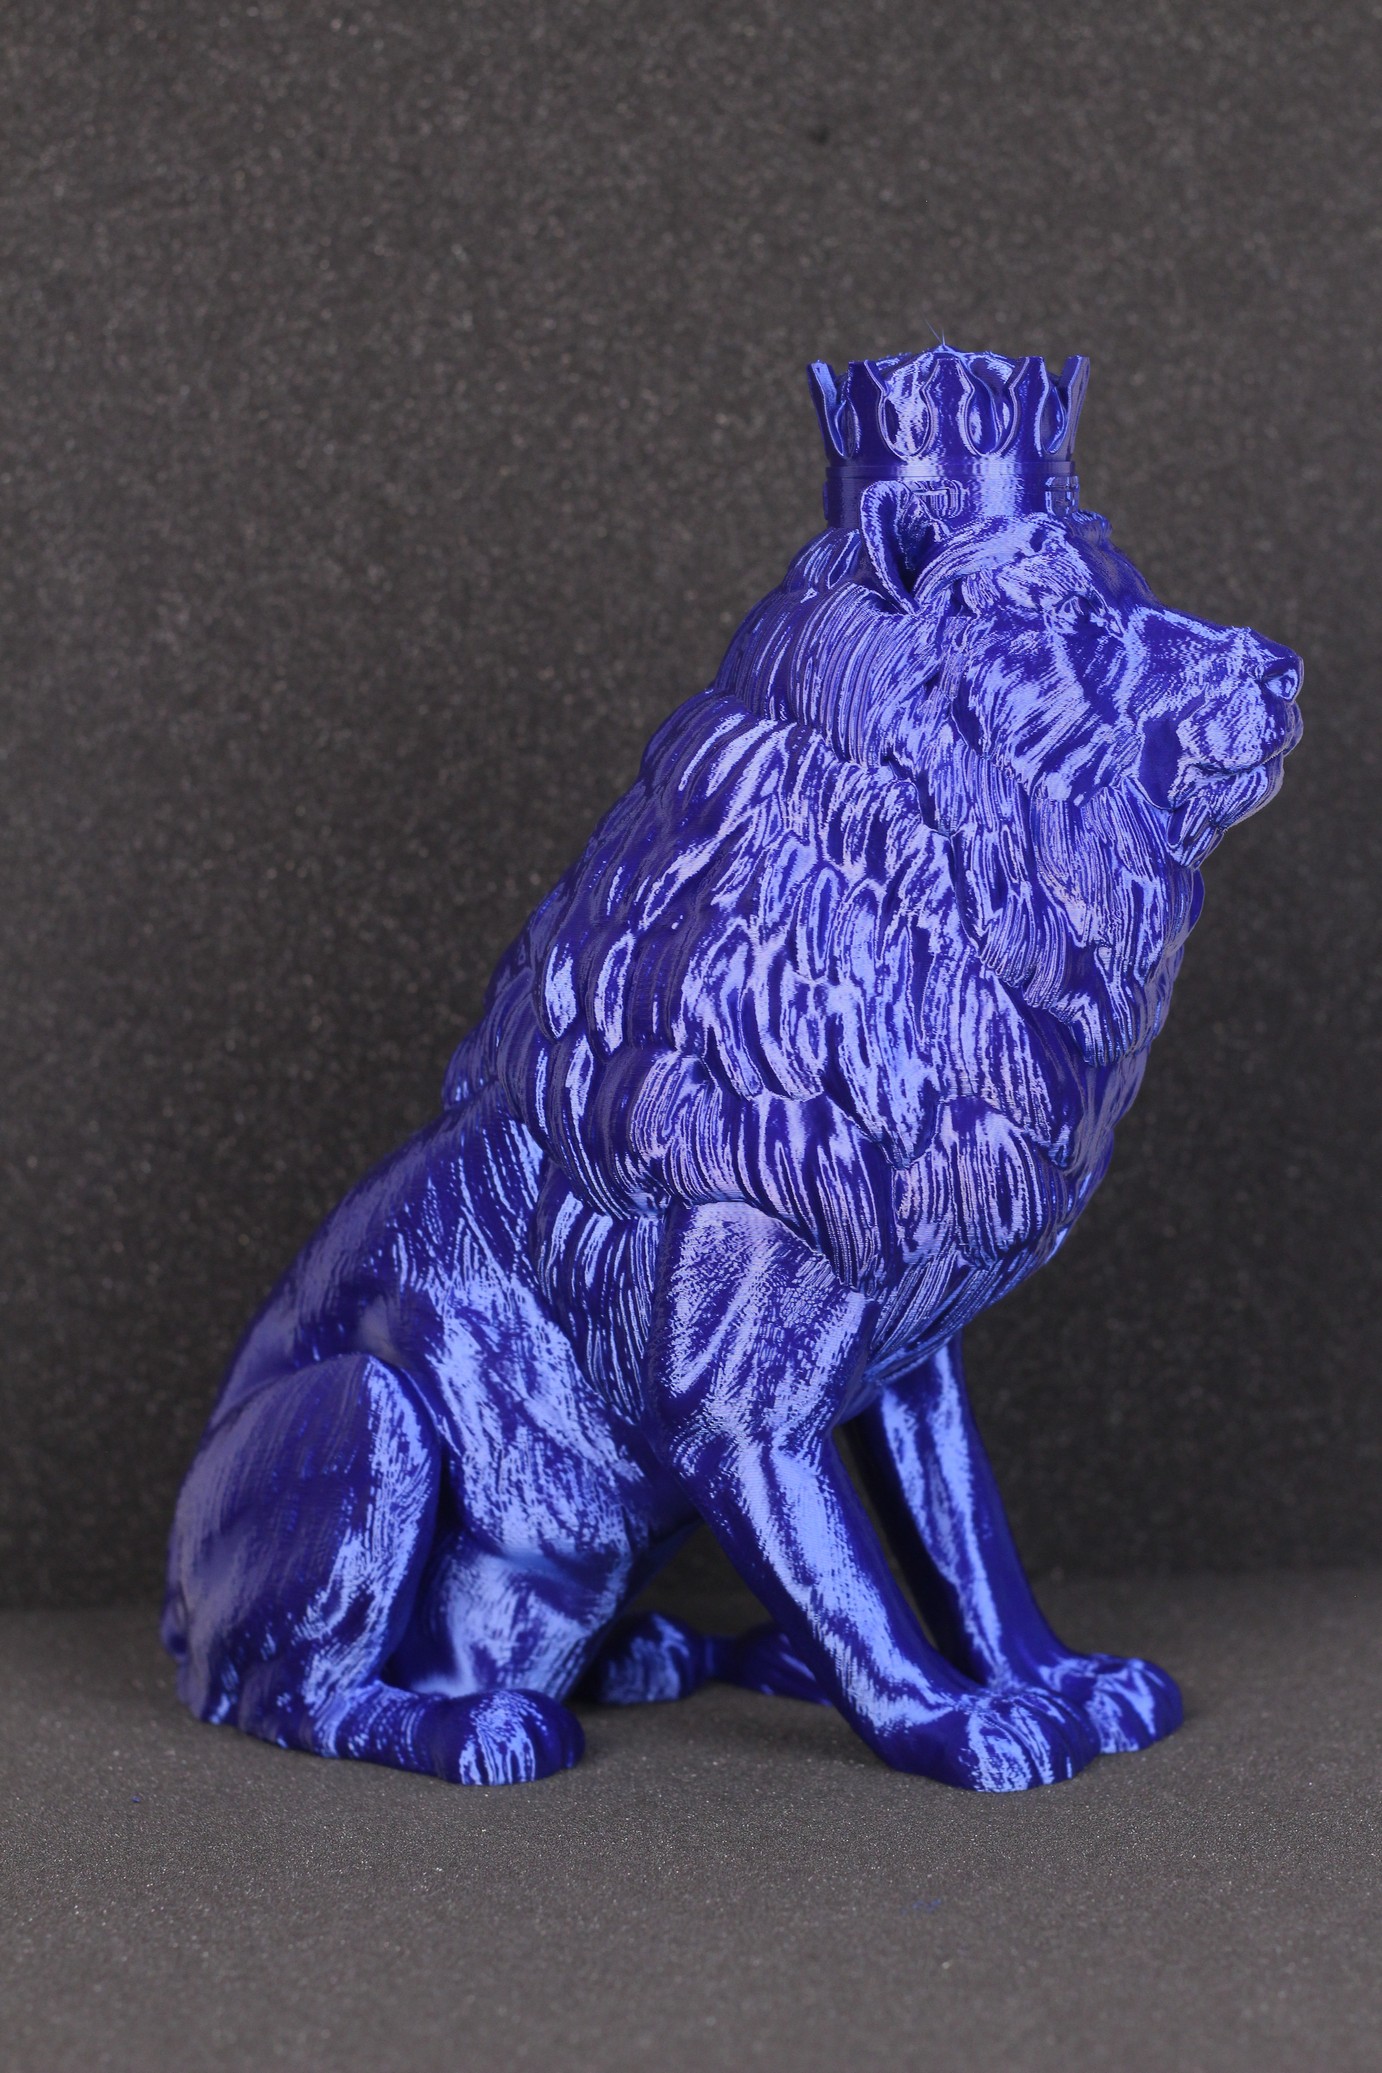 King Roary printed on Ender 3 S1 2 | Creality Ender 3 S1 Review: Almost Perfect